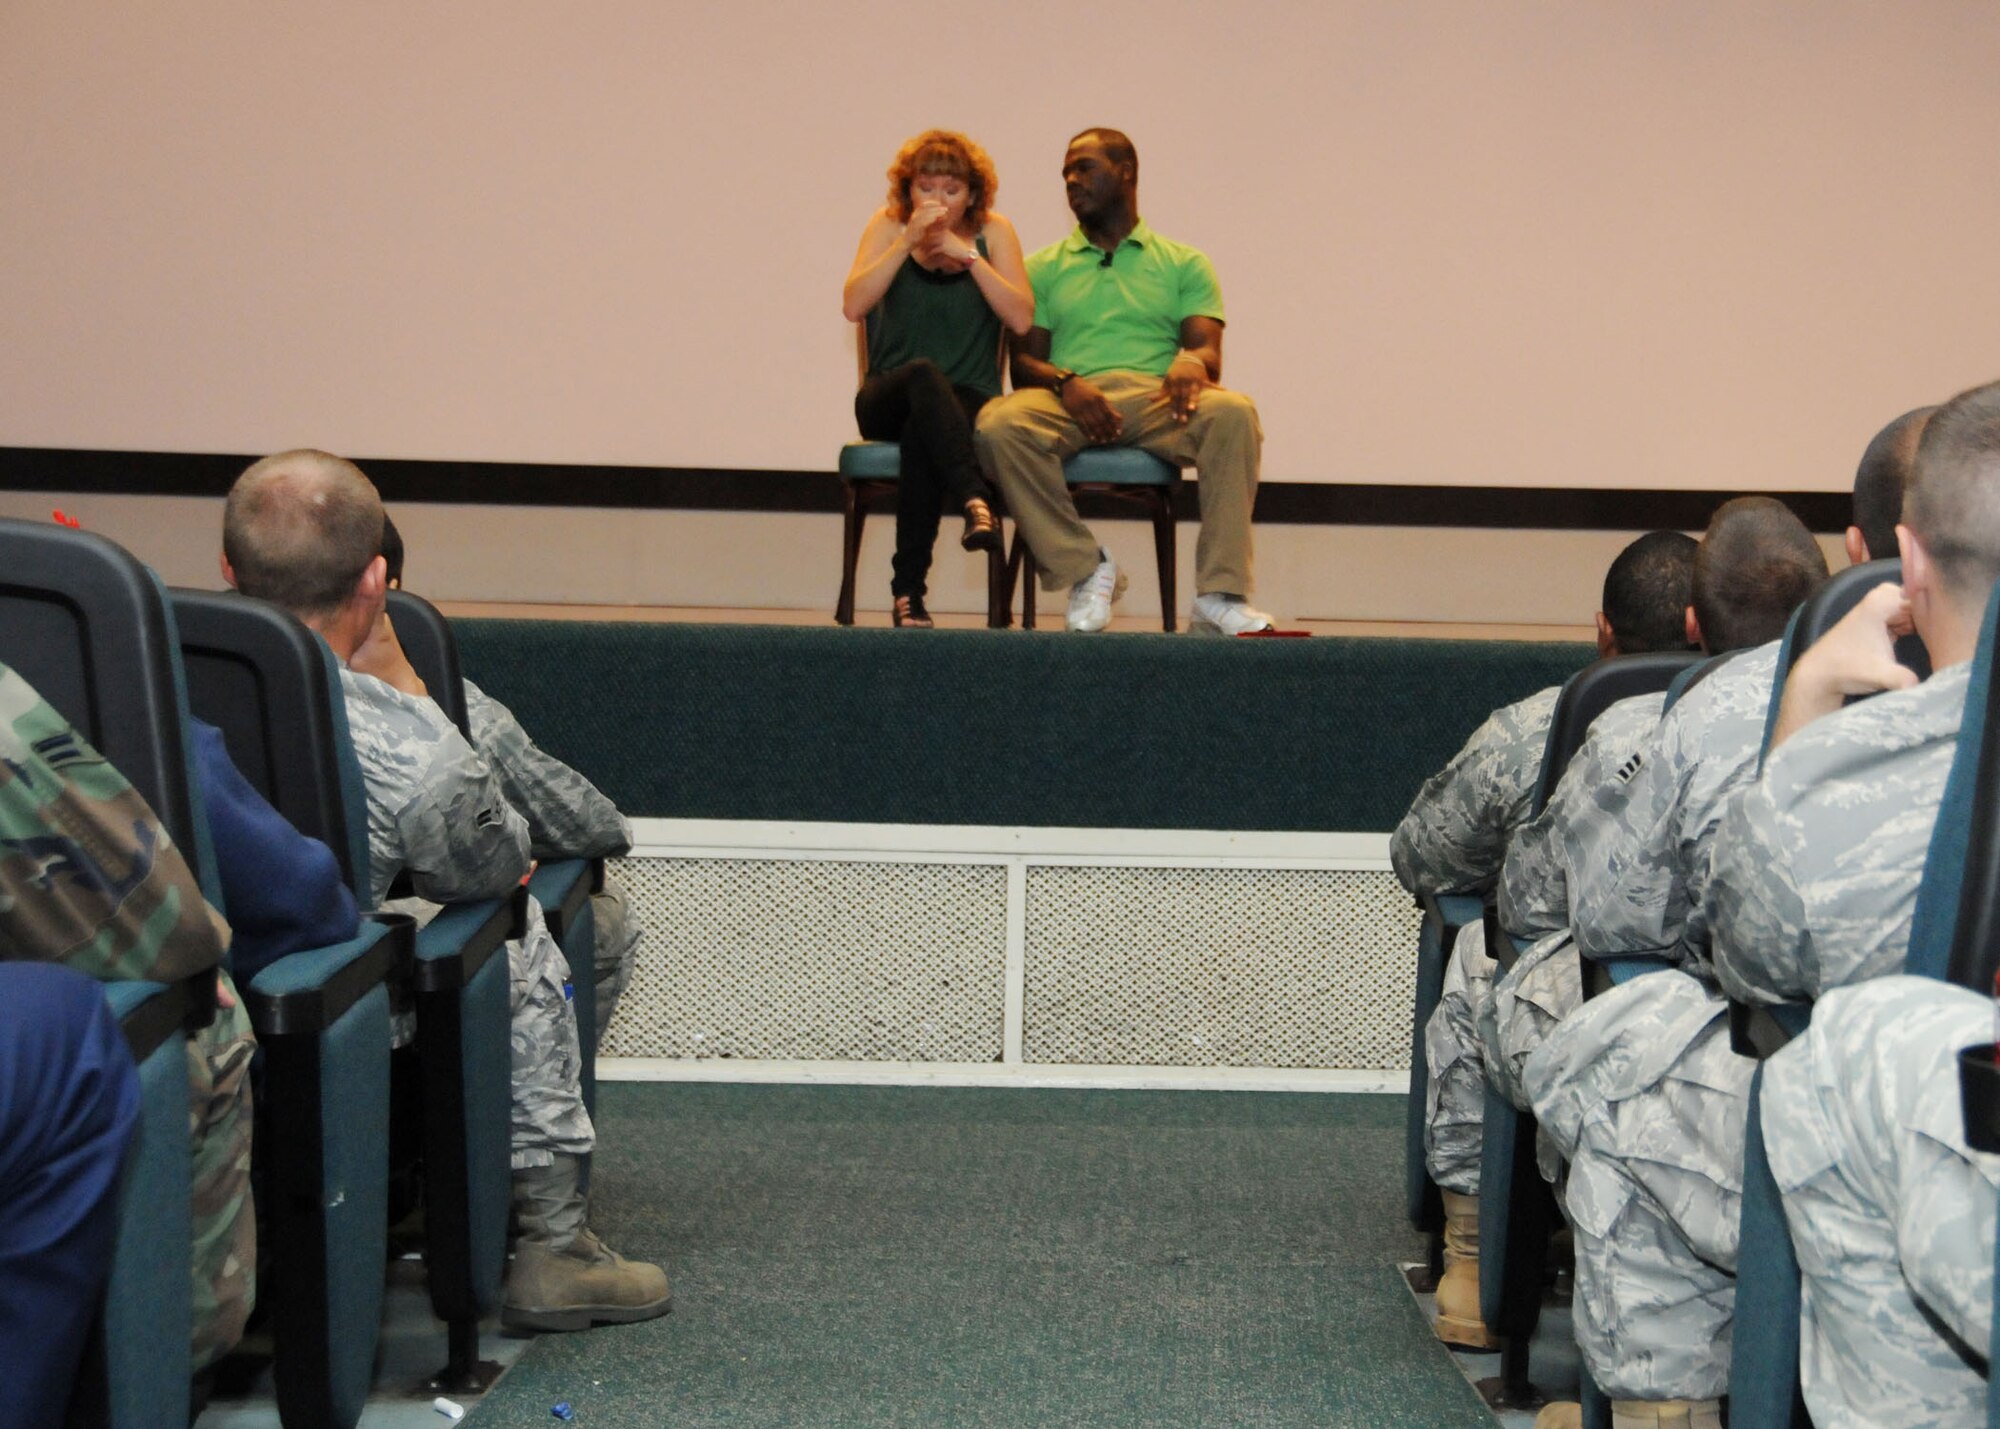 ANDERSEN AIR FORCE BASE, Guam - More than 800 Airmen attend a 90-minute interactive improv show "Sex Signals" hosted by the 36th Wing Sexual Assault Prevention and Response Program. Actors Courtney Abbott and Kyle Terry focused on issues such as dating, sex, sexual assault and rape. With a total of six shows in Guam and more than 30 in just three and a half weeks, this wraps up their tour performing at military bases across the Pacific. (U.S. Air Force photo by Senior Airman Nichelle Griffiths)